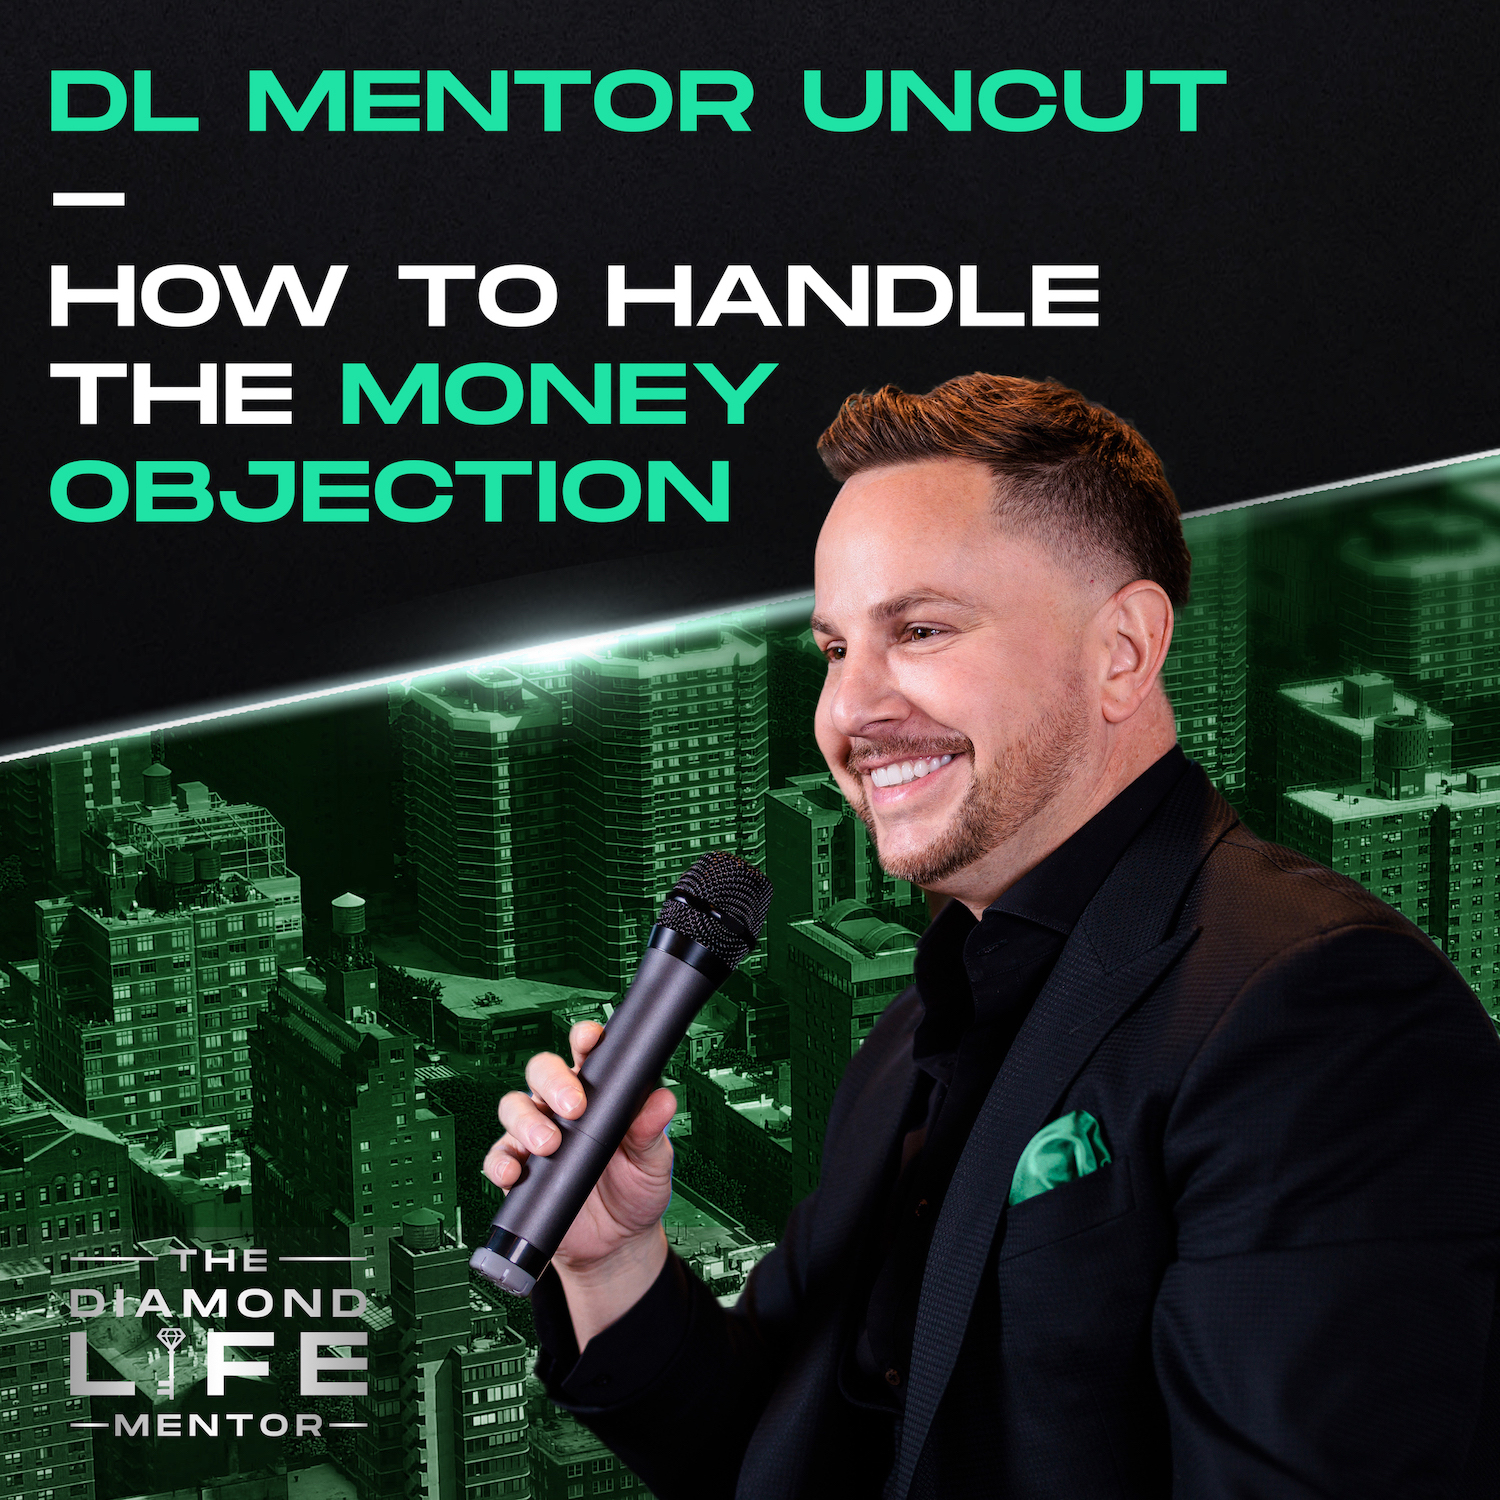 DL Mentor Uncut – How to Handle the Money Objection